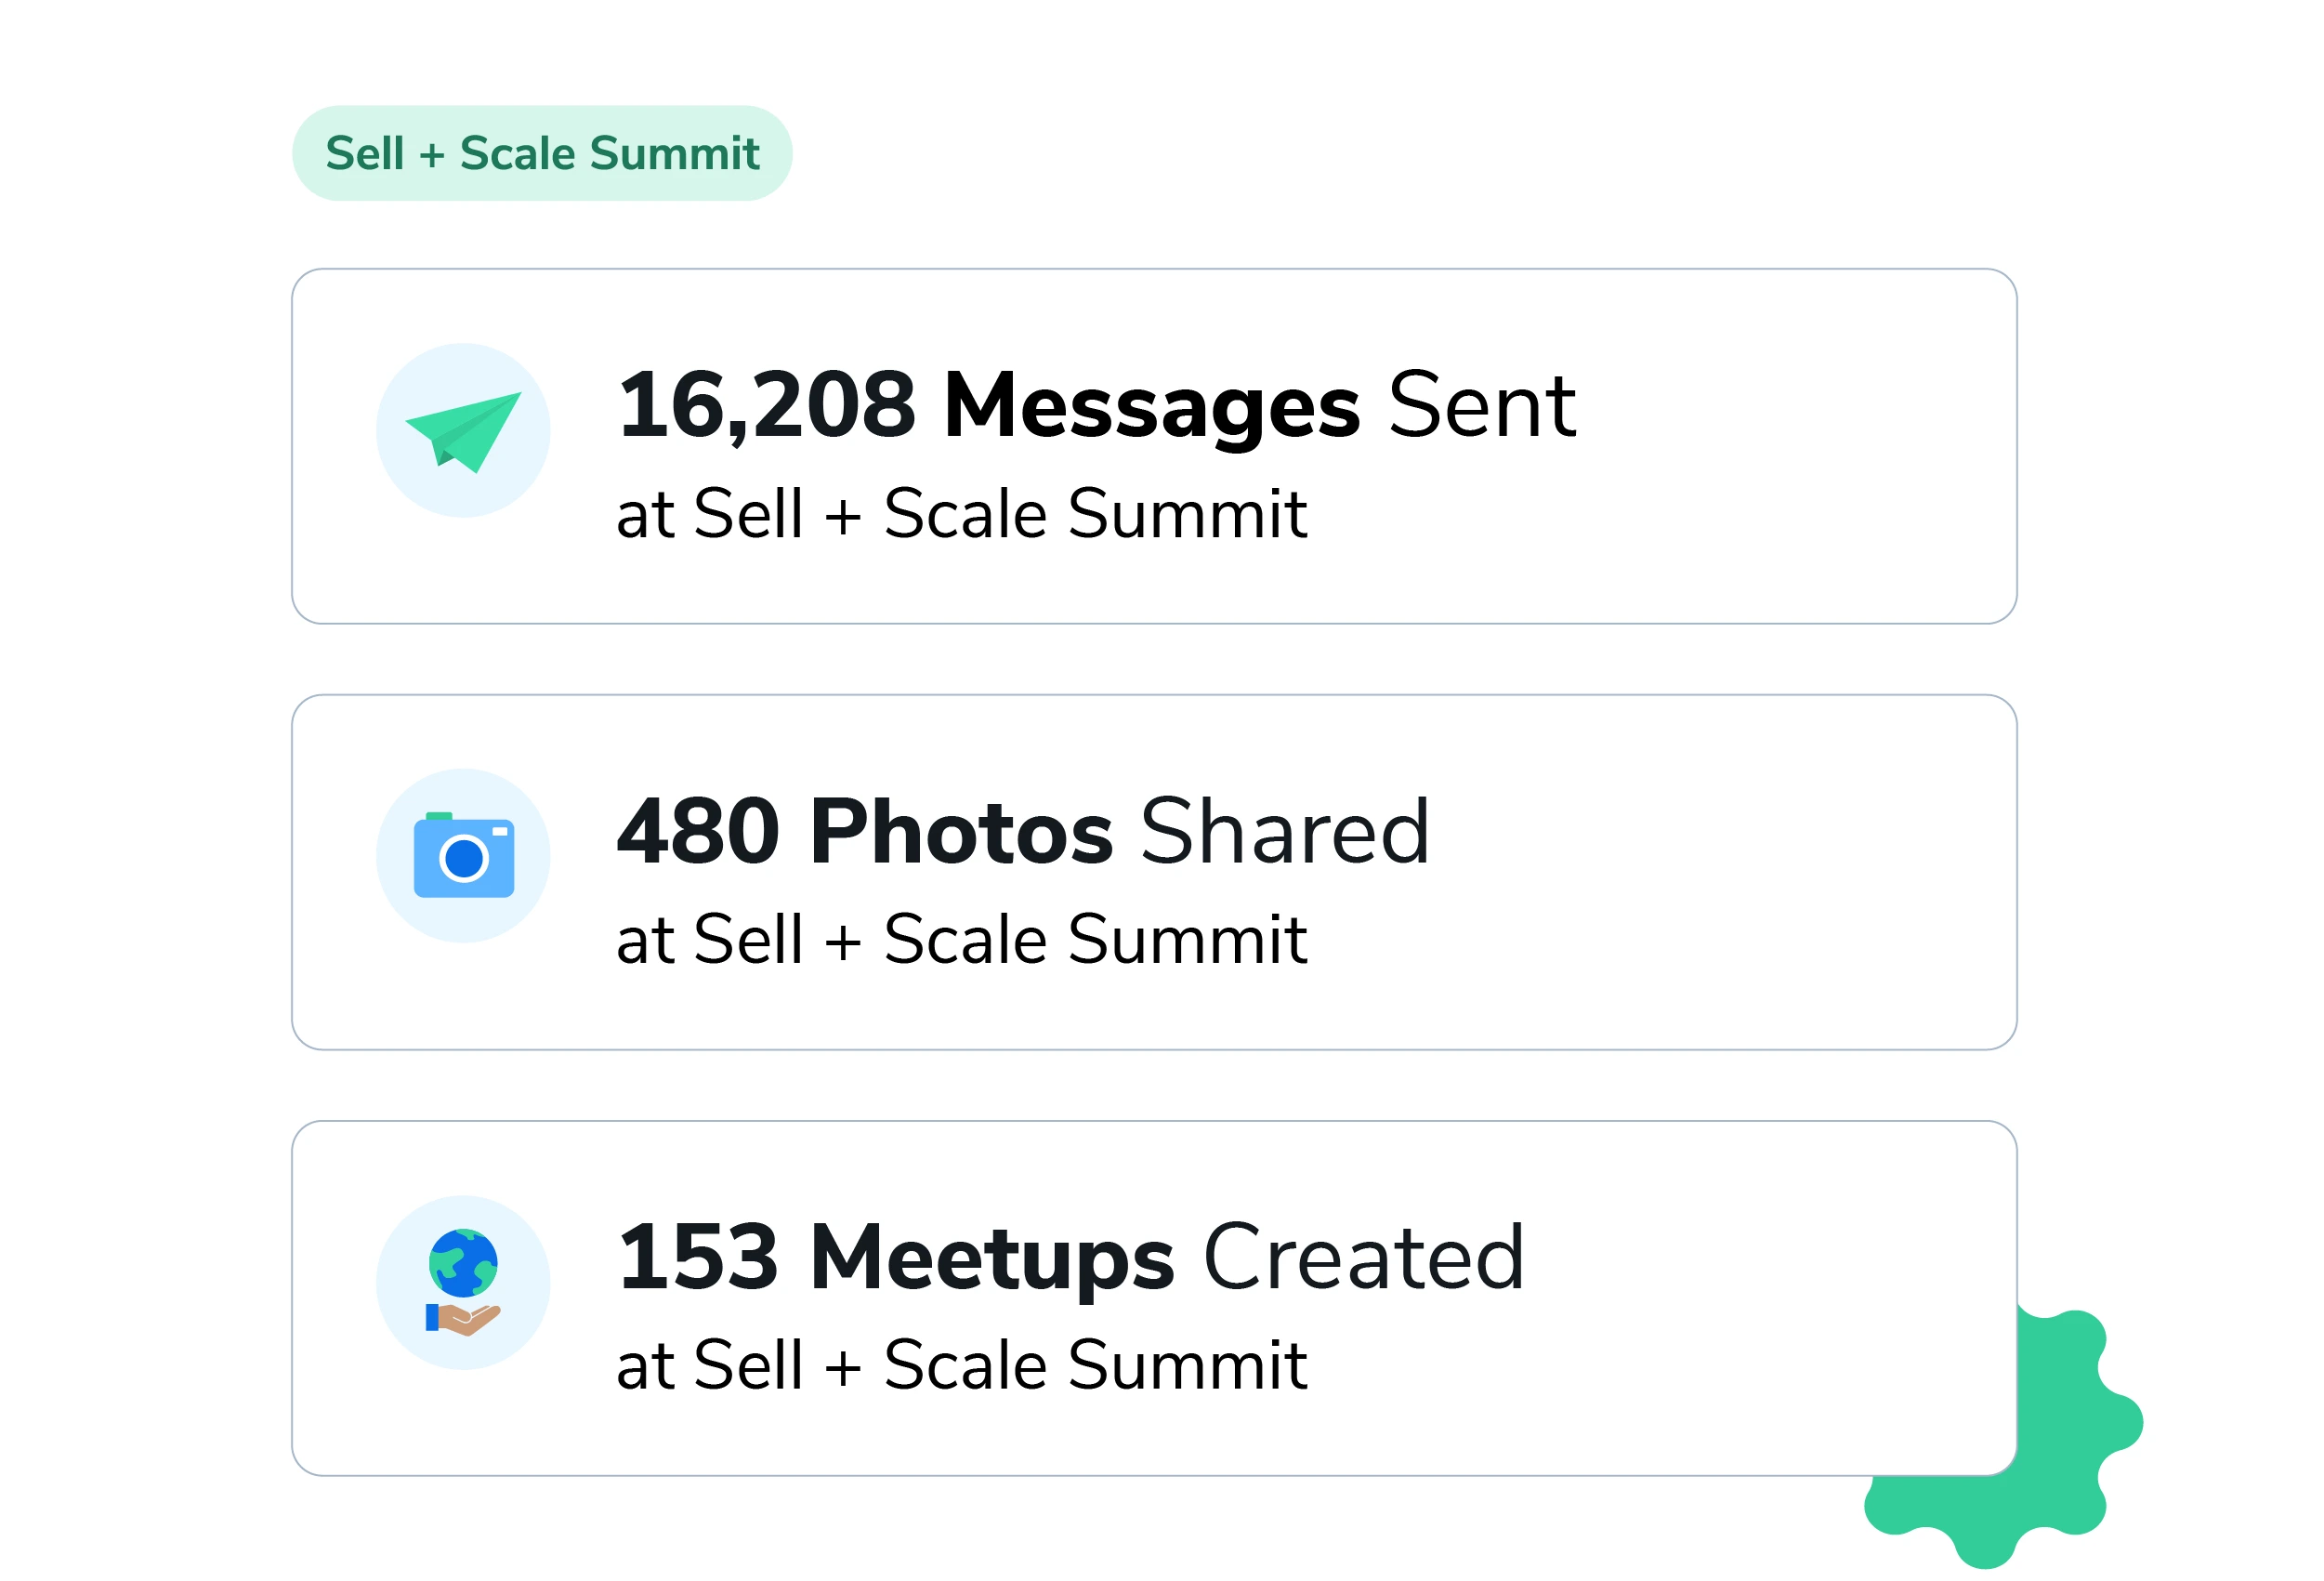 At Sell + Scale, we had 16,208 messages sent, 480 photos shared, and 153 meetups created.